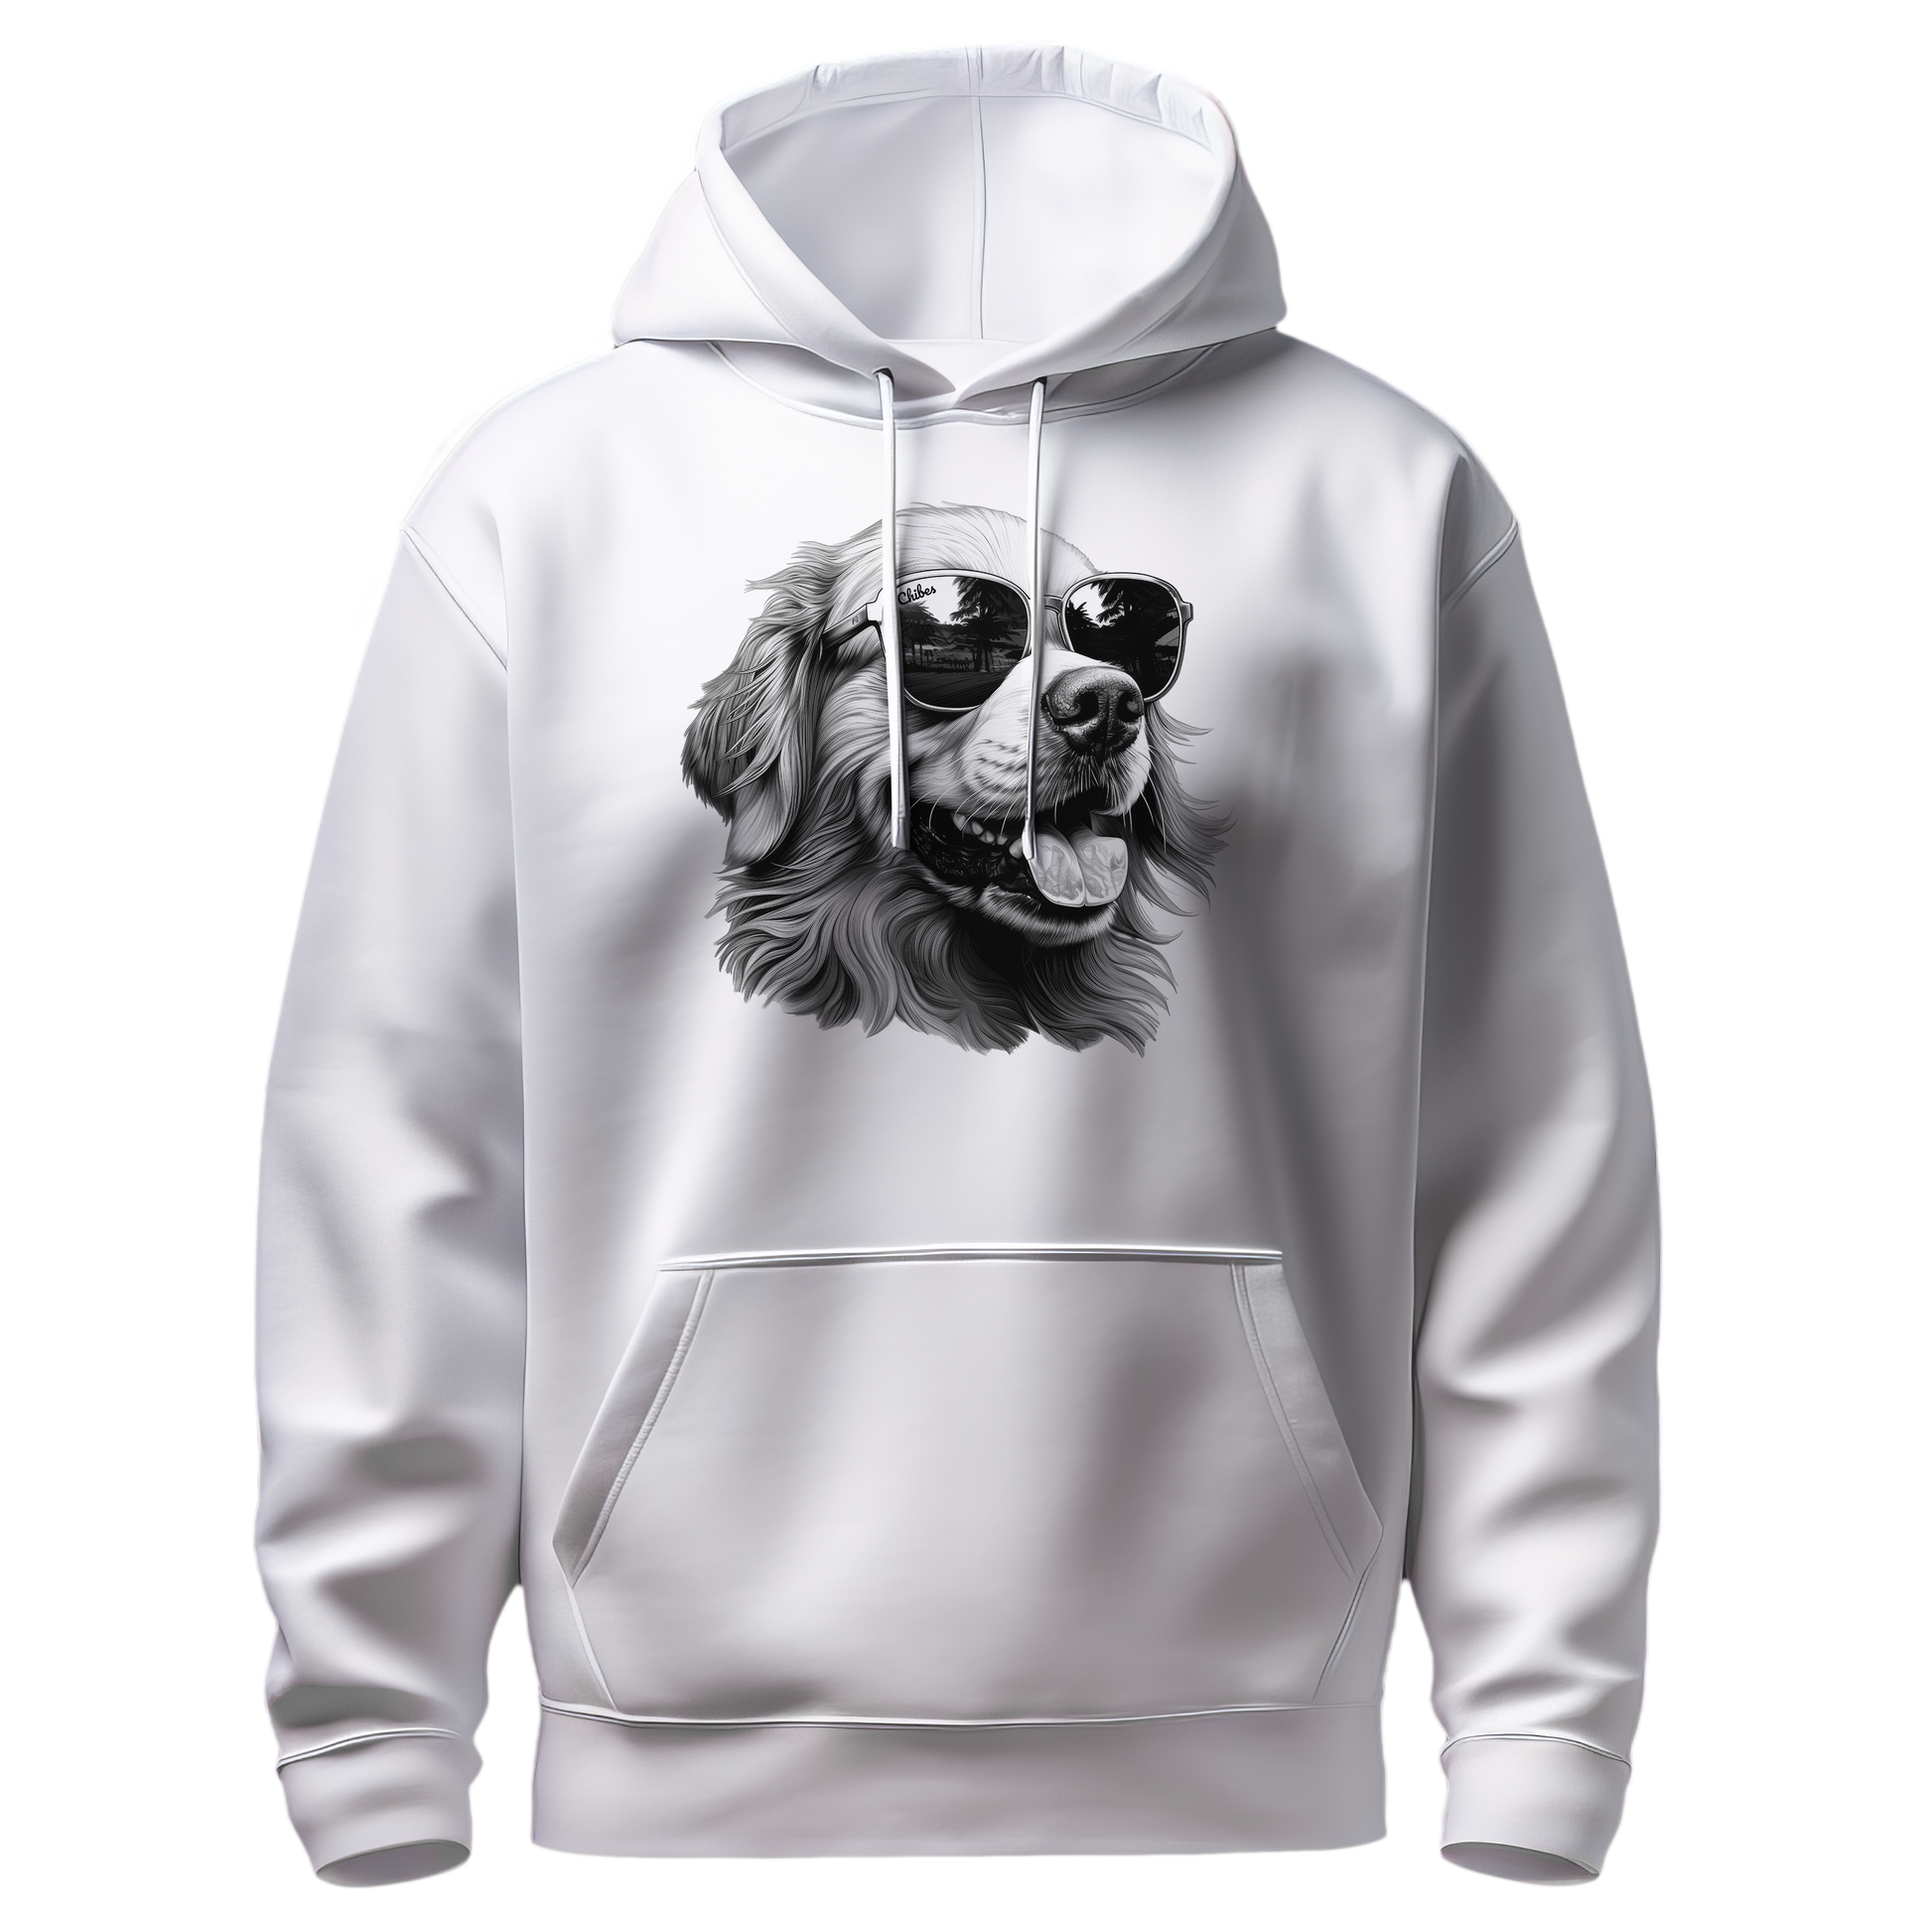 Chibes Streetwear: Dawg White Basic Hoodie for both men and women with dog, Golden retriever, print.